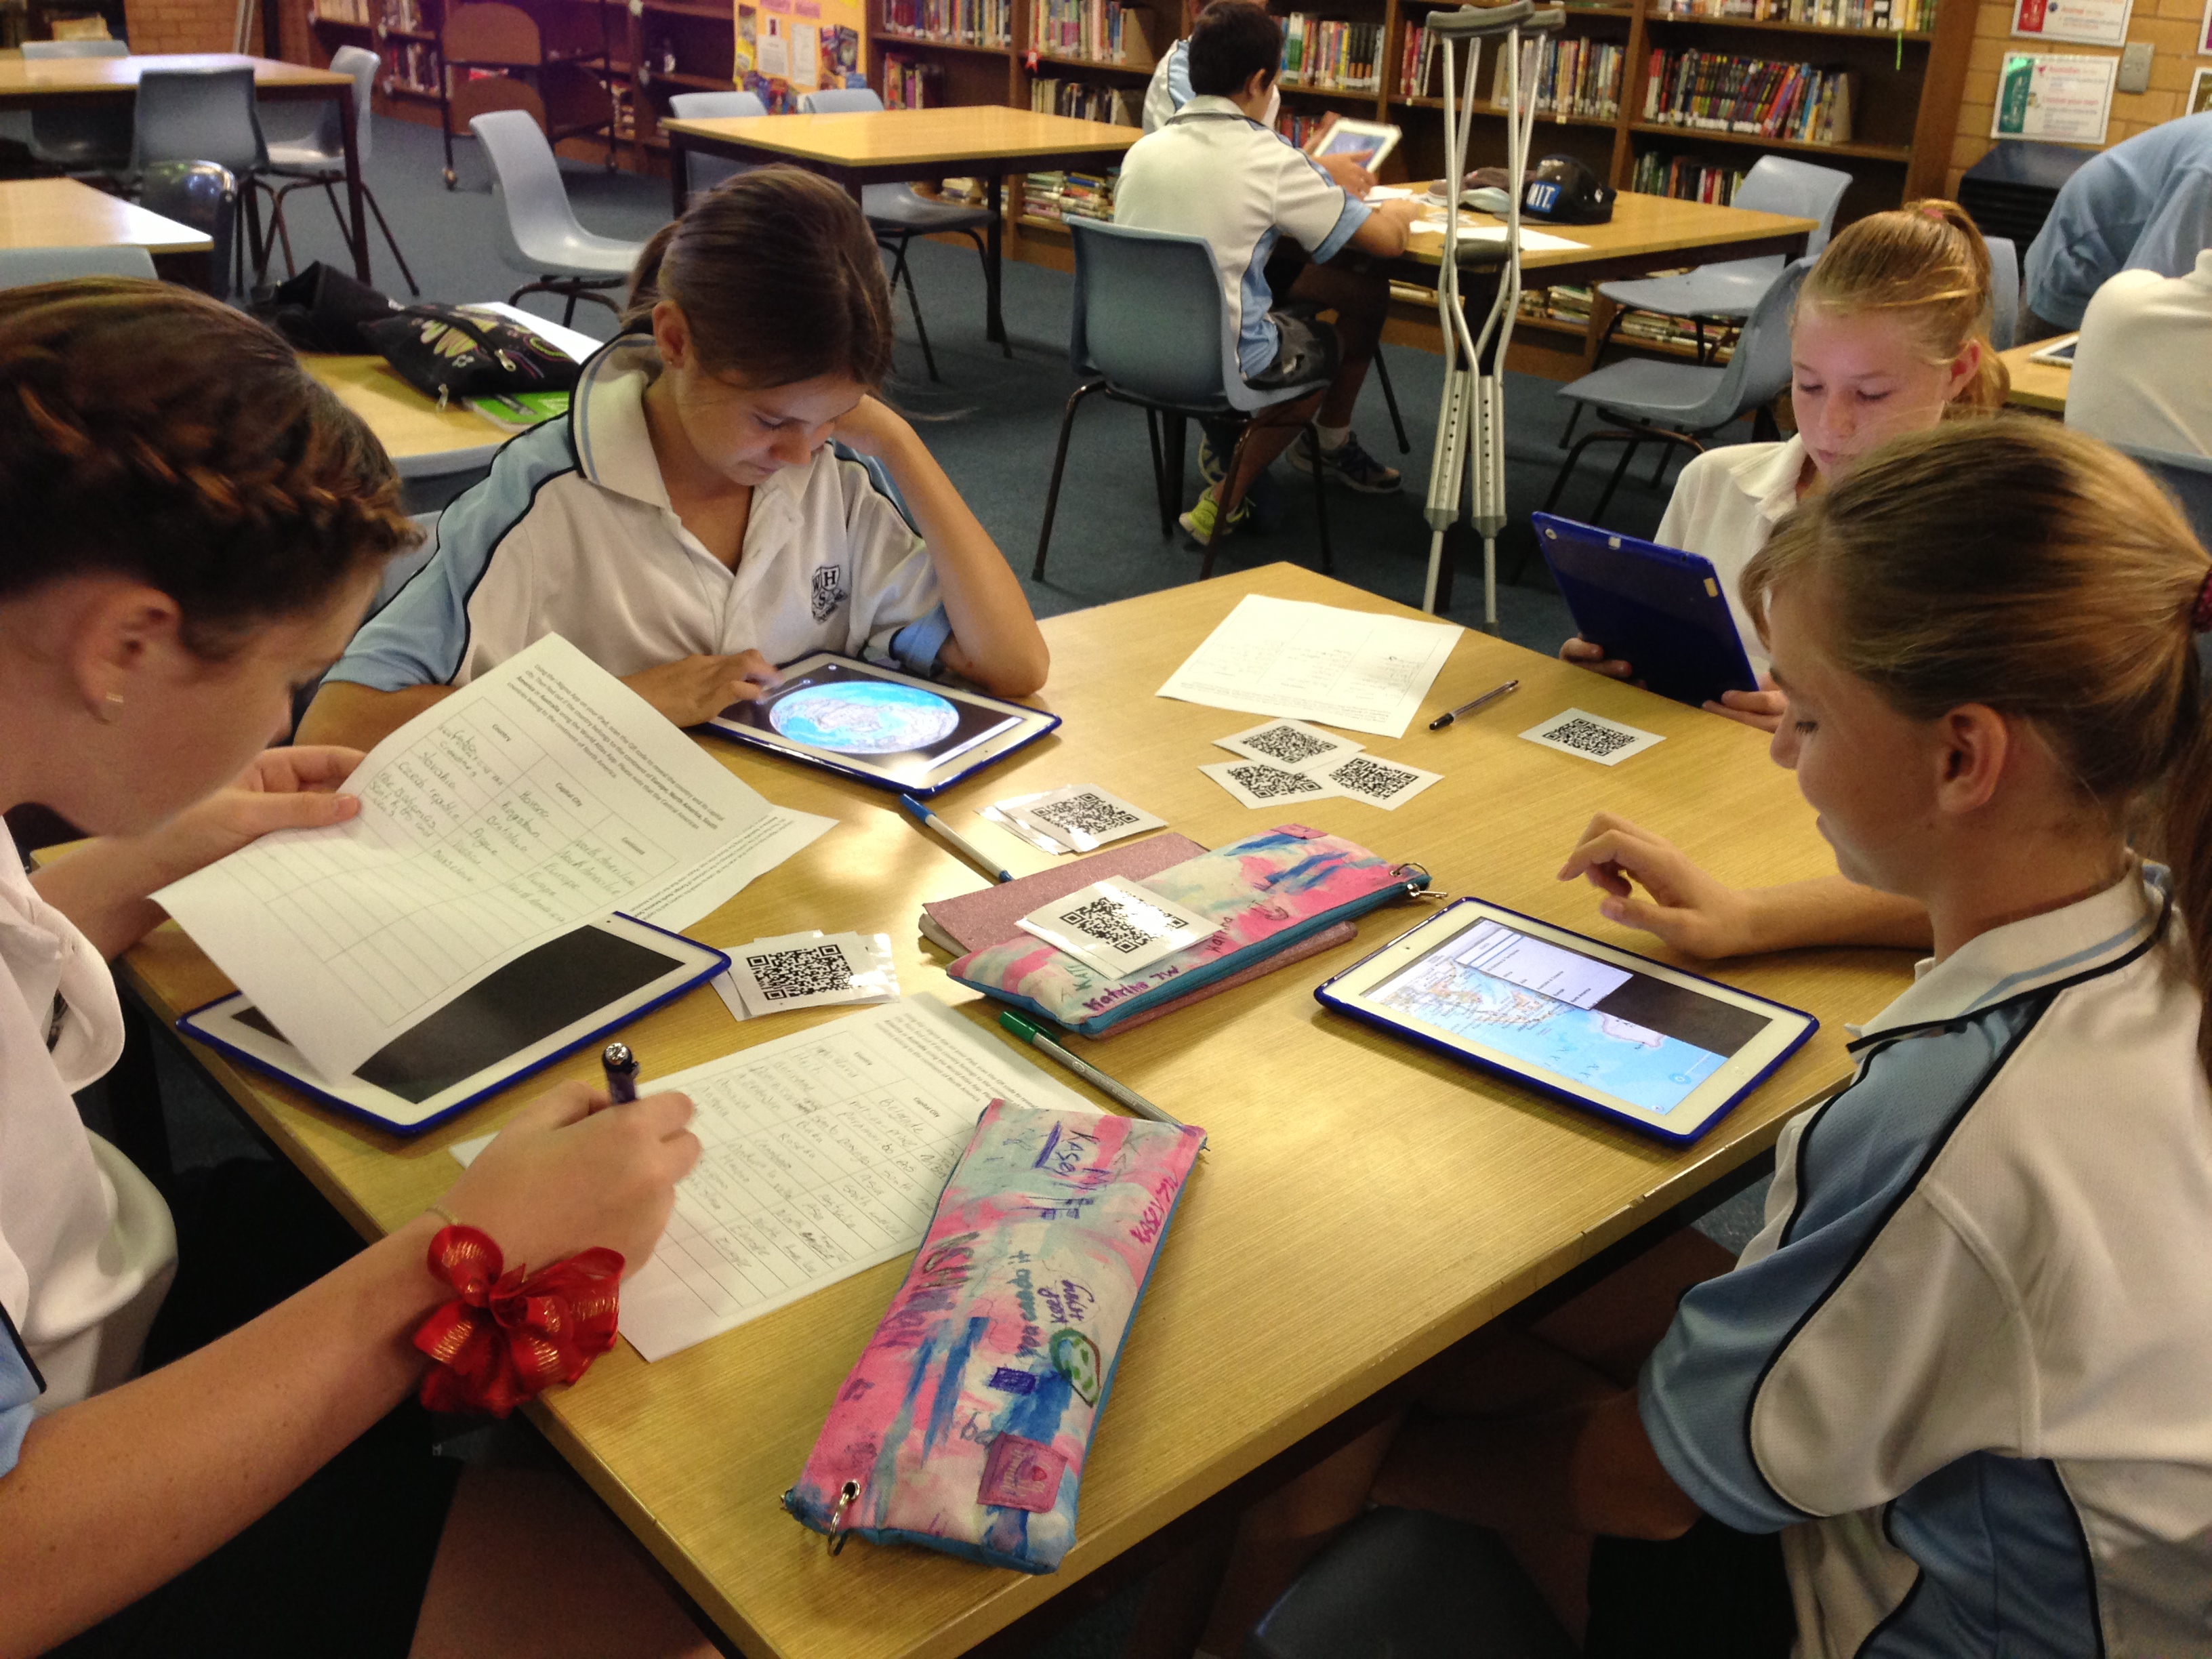 Year 7 students using iPads during class time